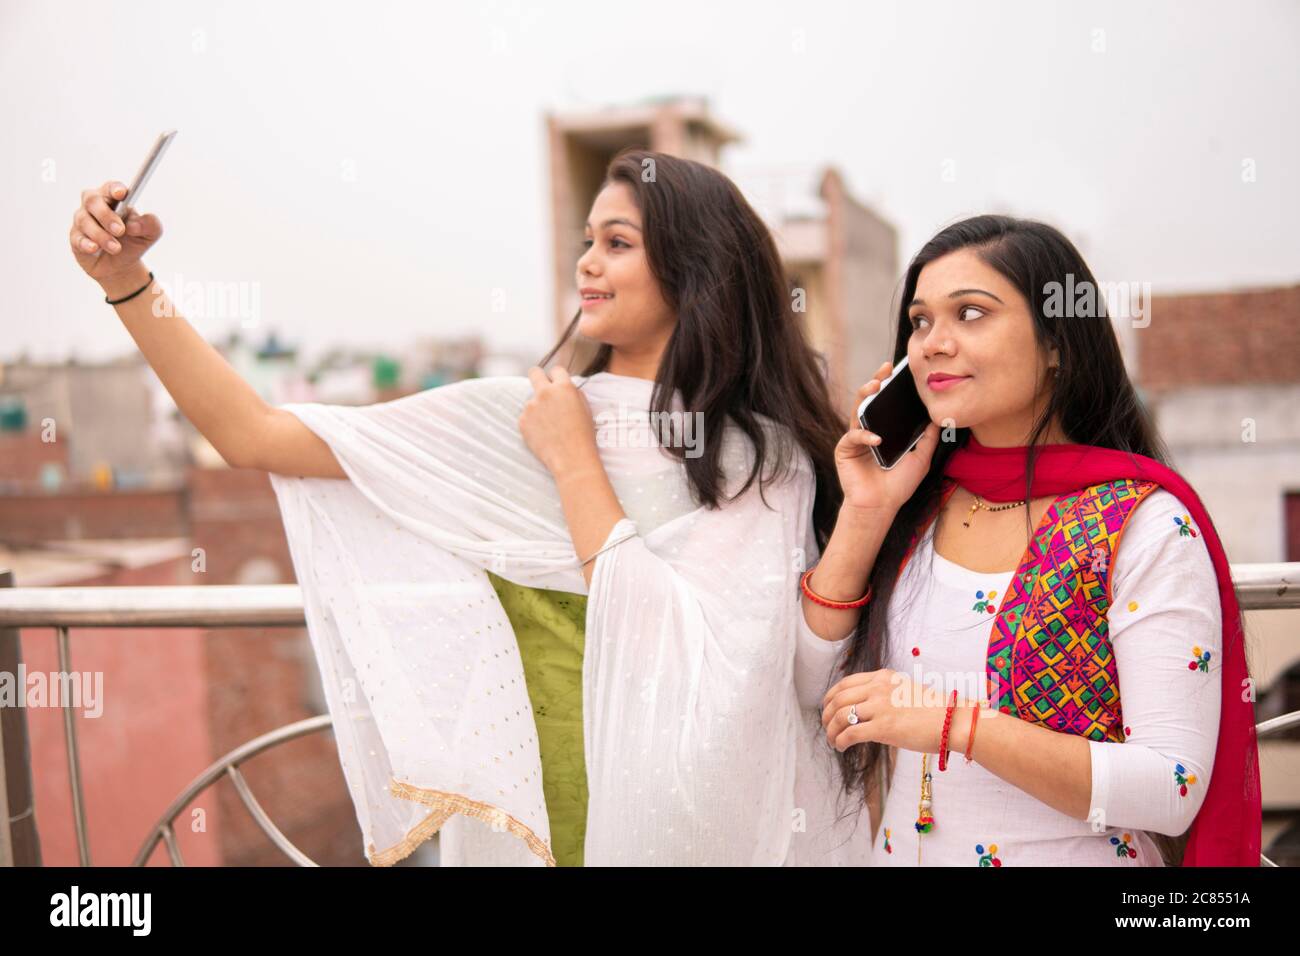 Beautiful Indian young women standing together near railing. One woman is busy in taking selfie and other is talking on phone. Stock Photo